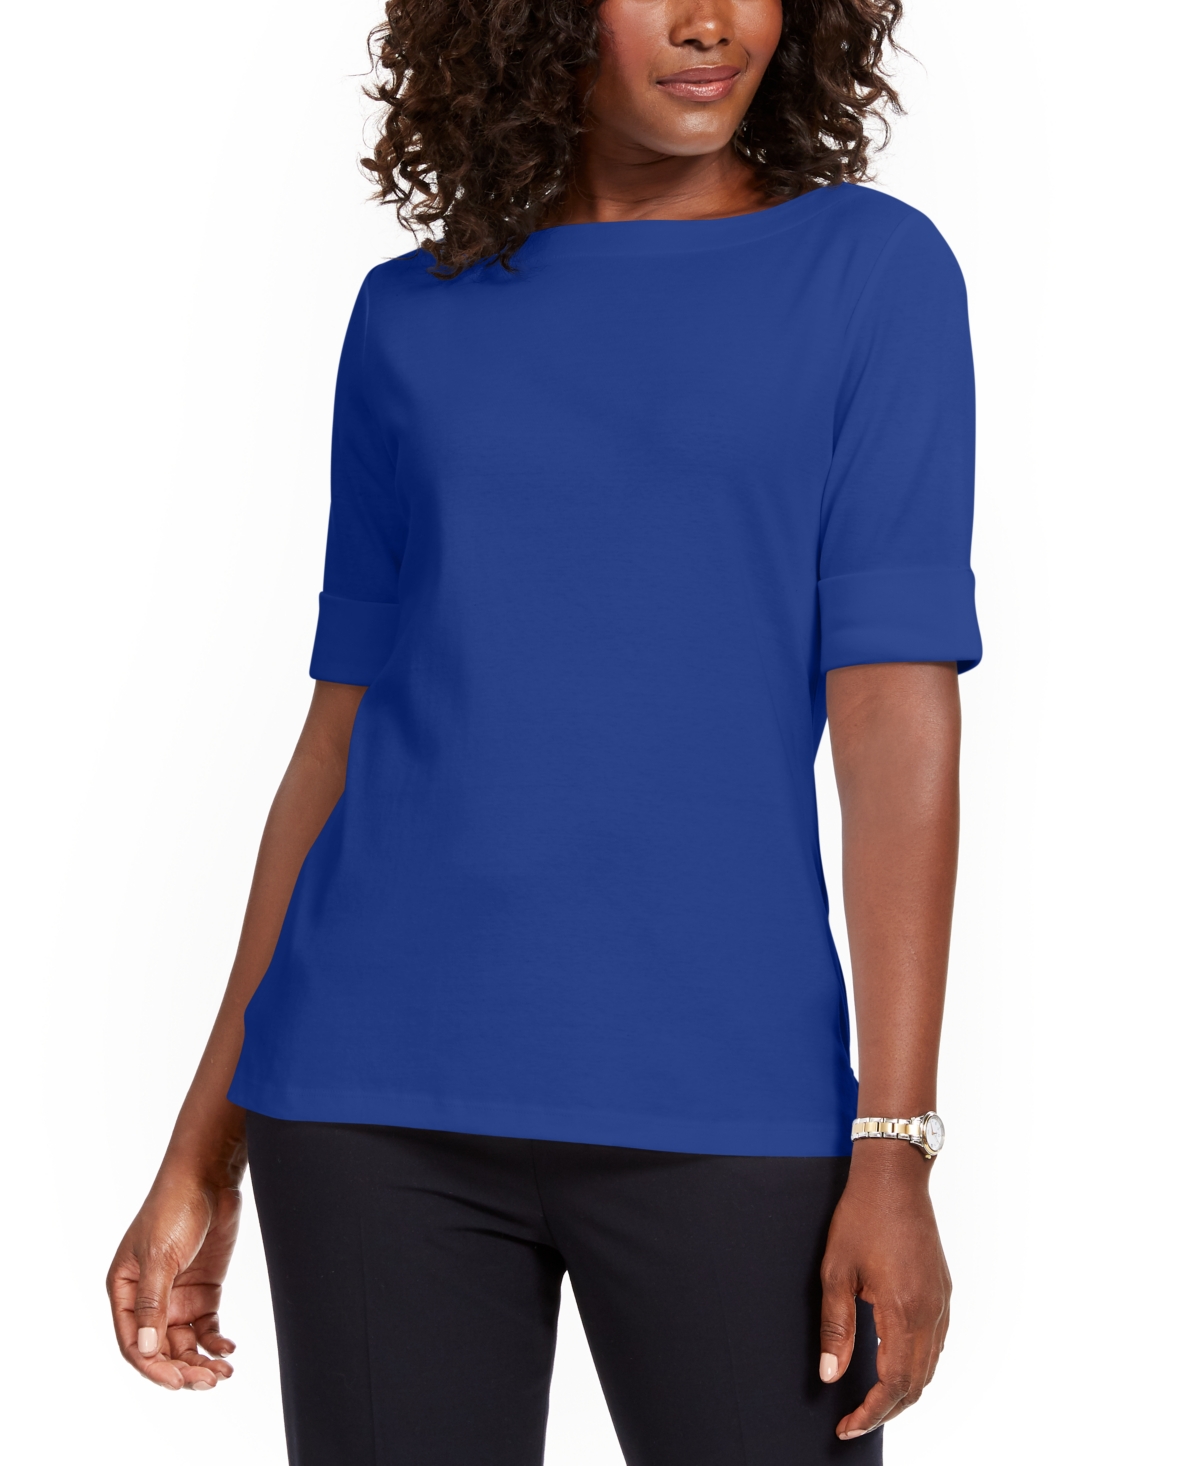 Petite Cotton Elbow-Sleeve T-Shirt, Created for Macy's - Ultra Blue